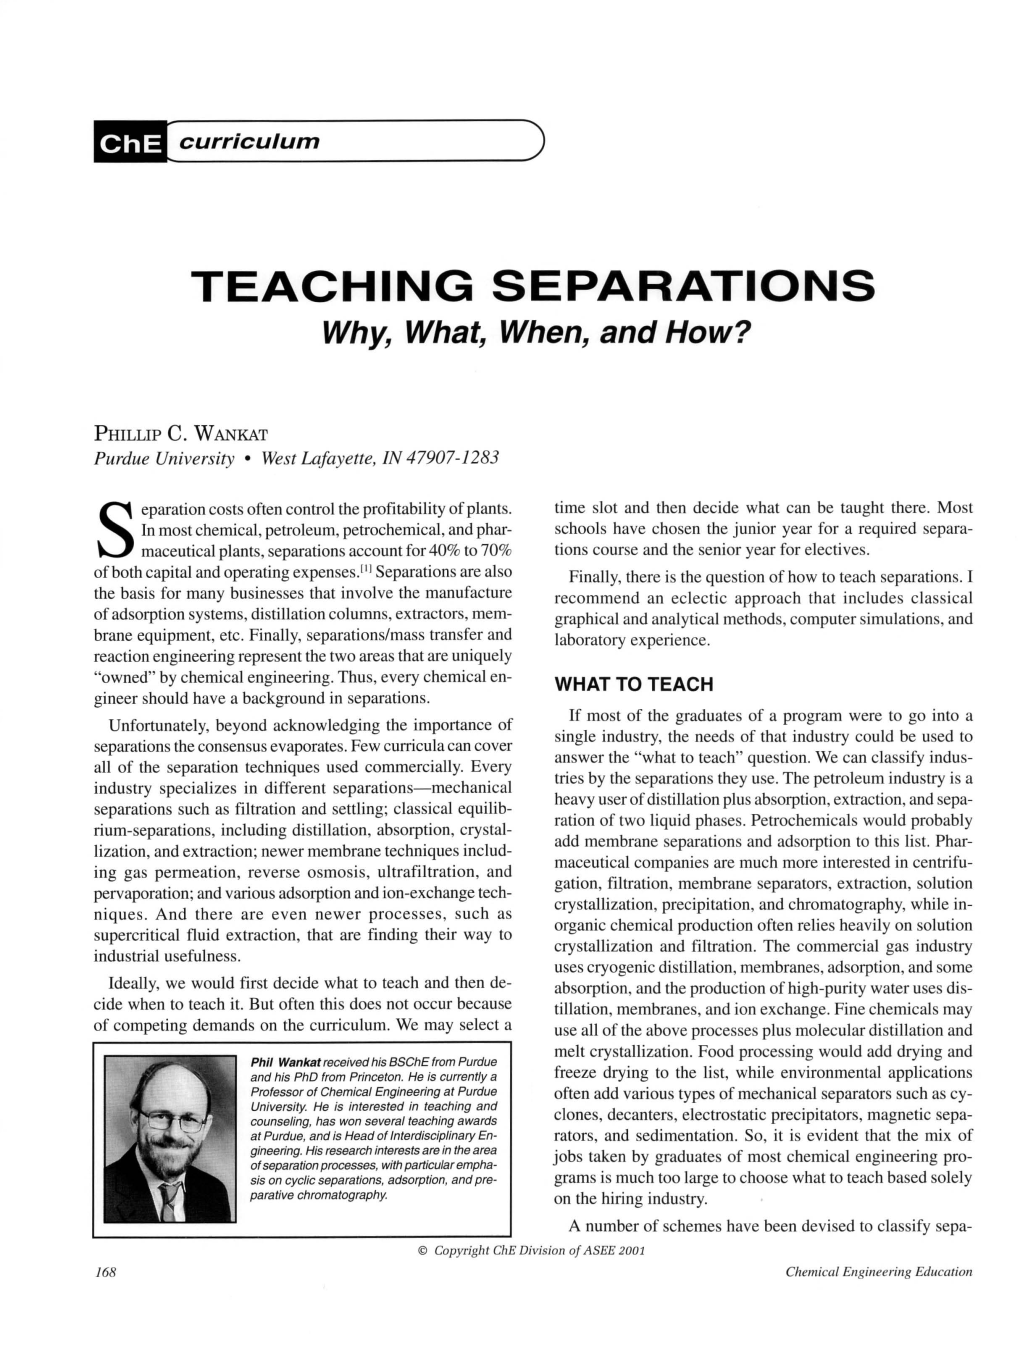 TEACHING SEPARATIONS Why, What, When, and How?